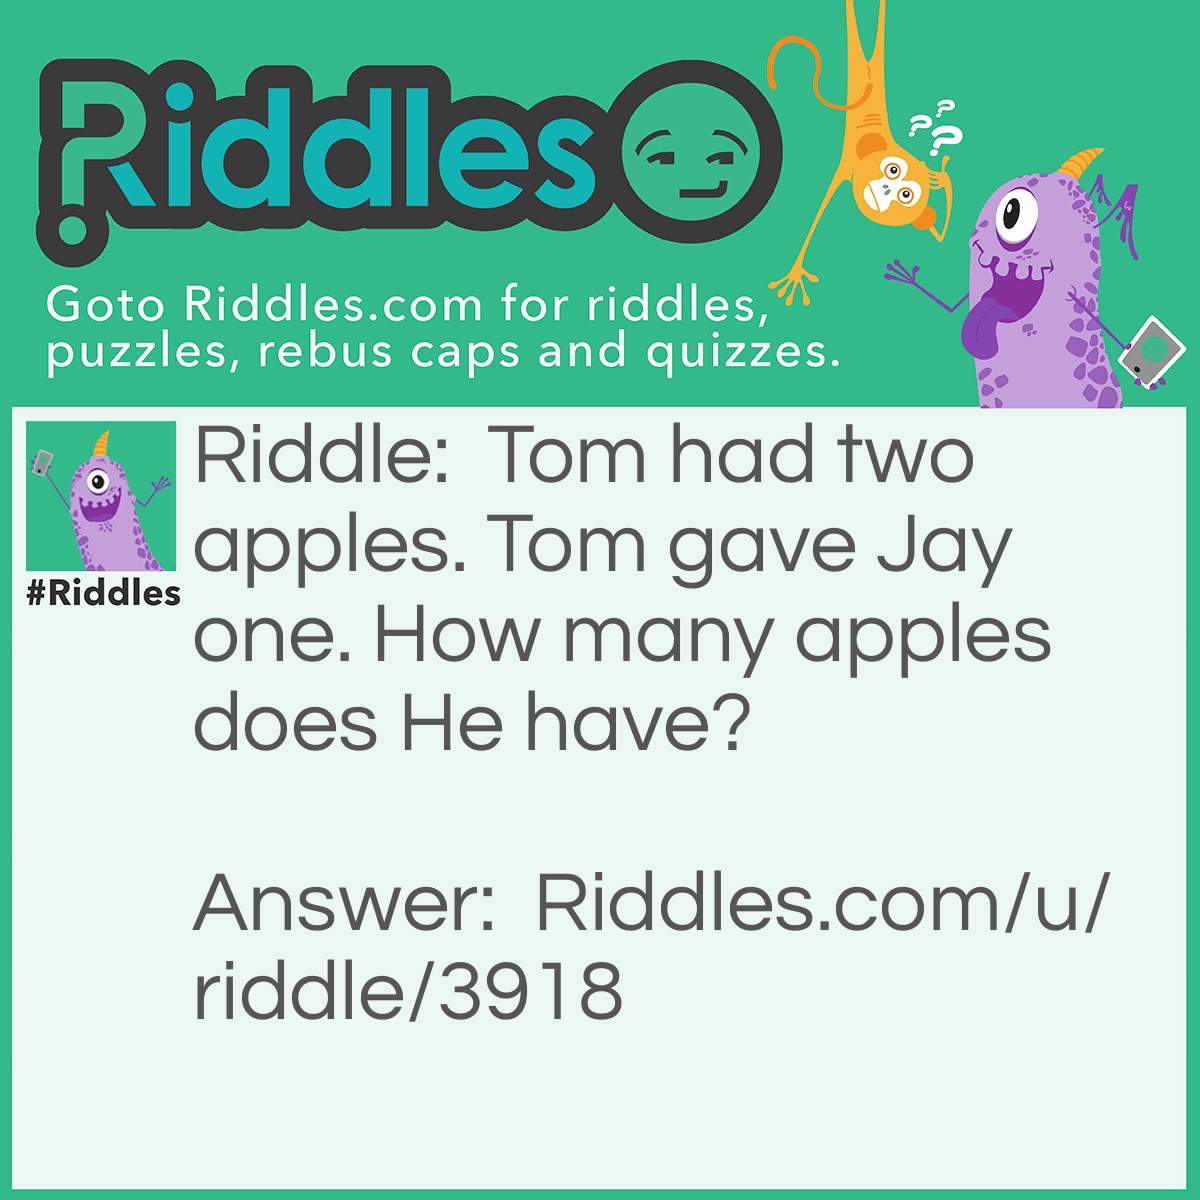 Riddle: Tom had two apples. Tom gave Jay one. How many apples does He have? Answer: 0. Tom has one and Jay has one, but He has none.